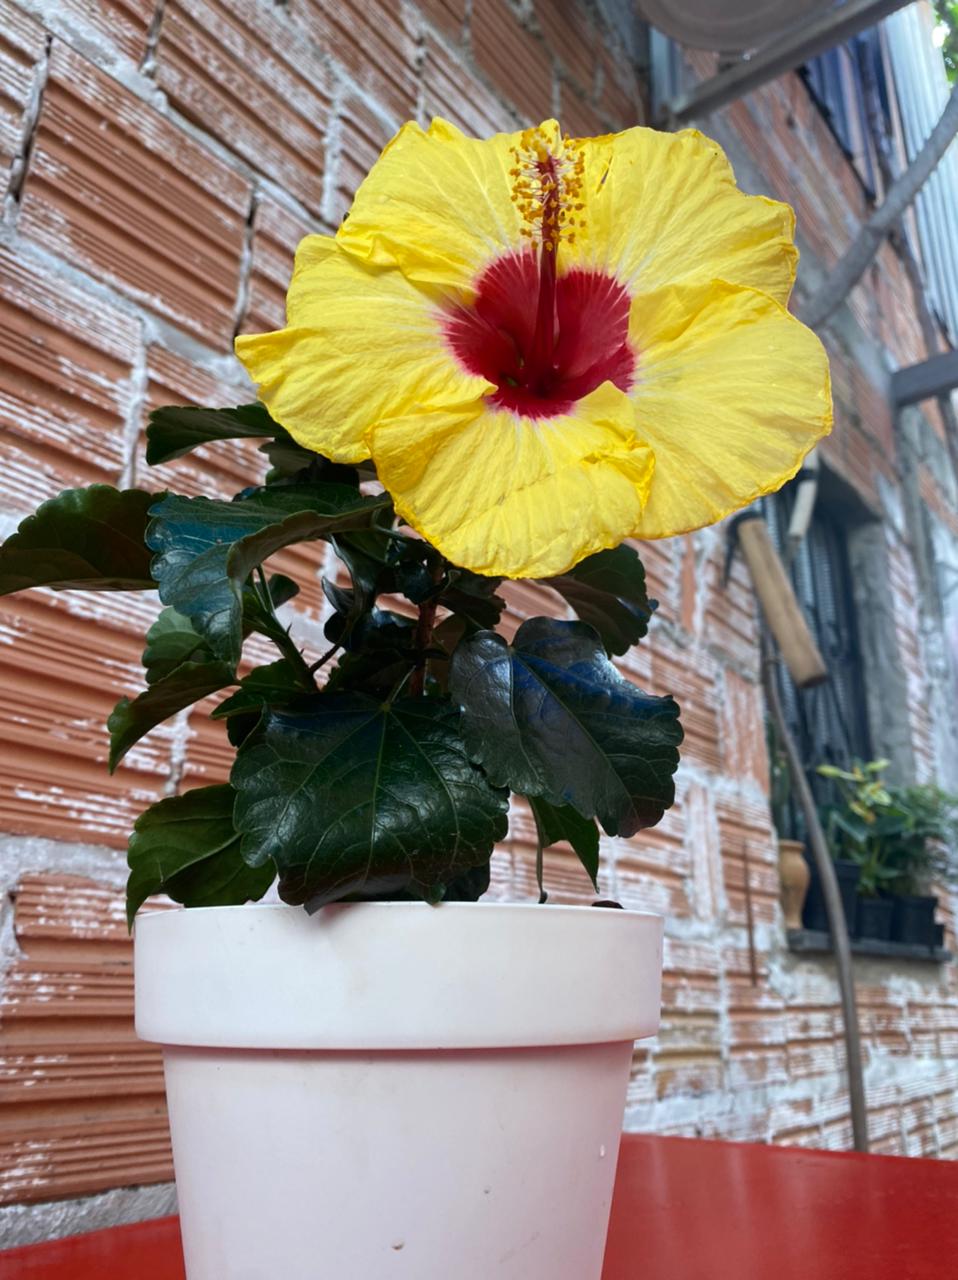 A yellow flower on a white base, in front of a brick wall